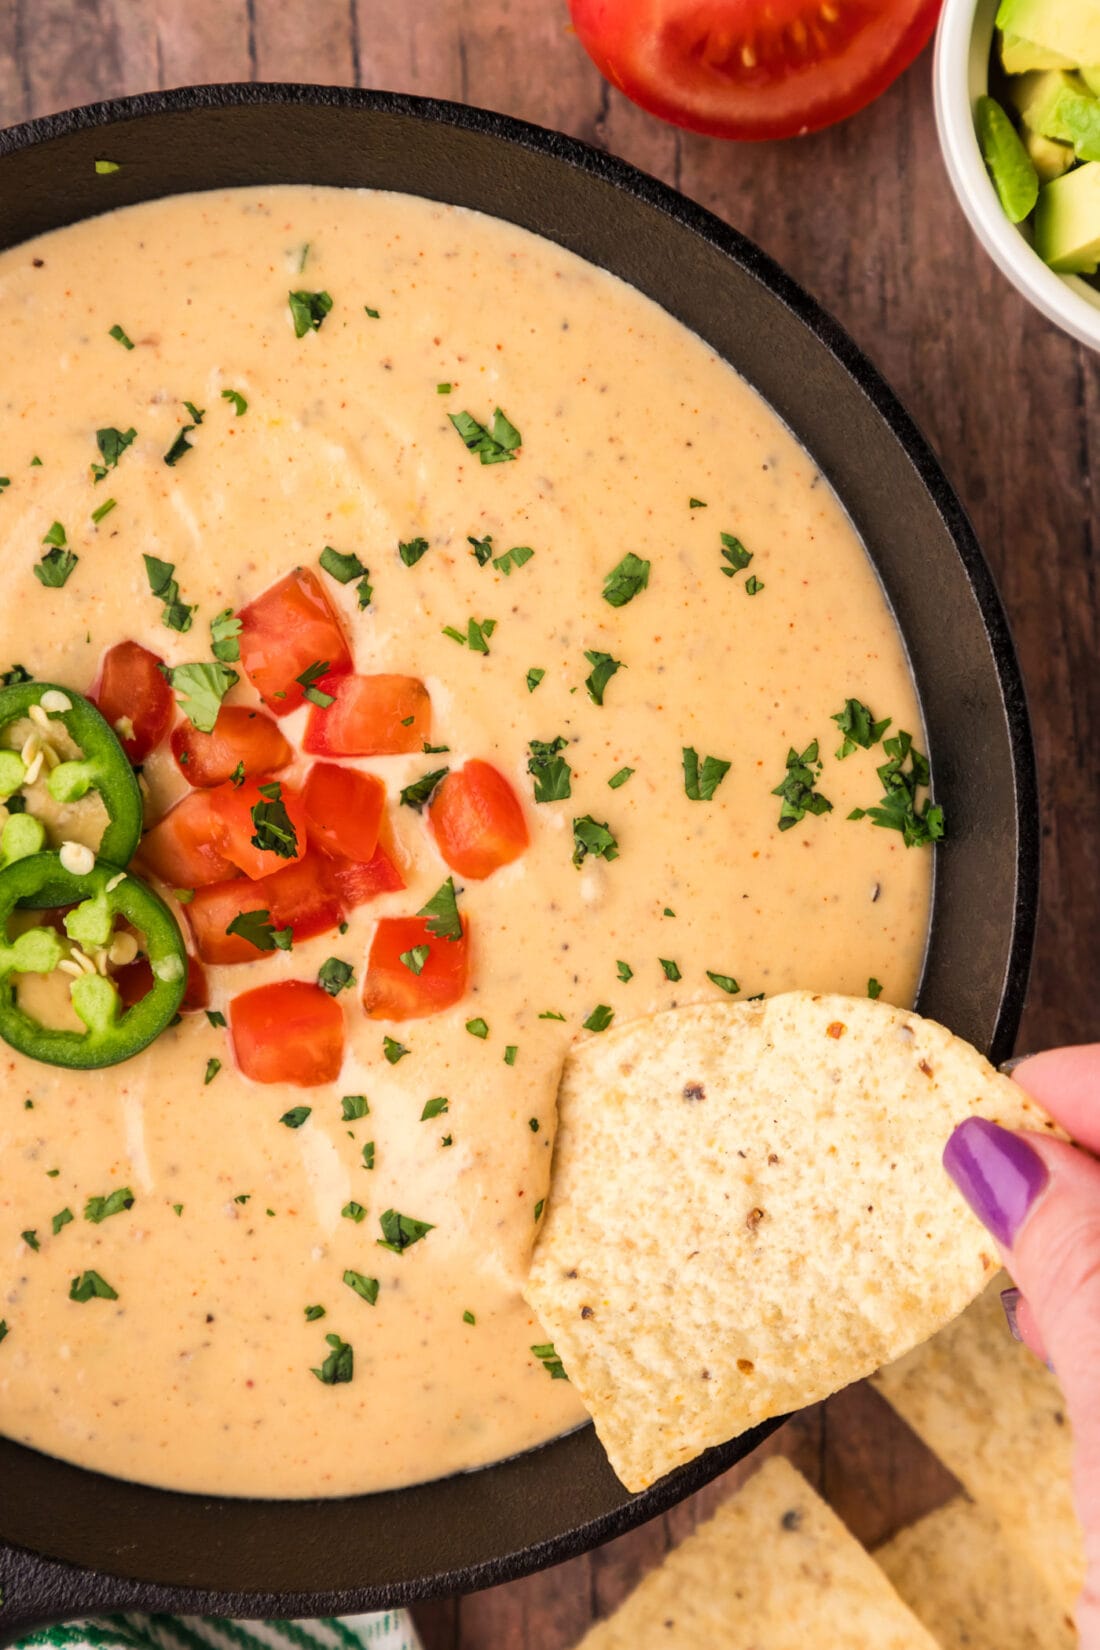 Tortilla chip being dipped into a skillet of Queso Dip